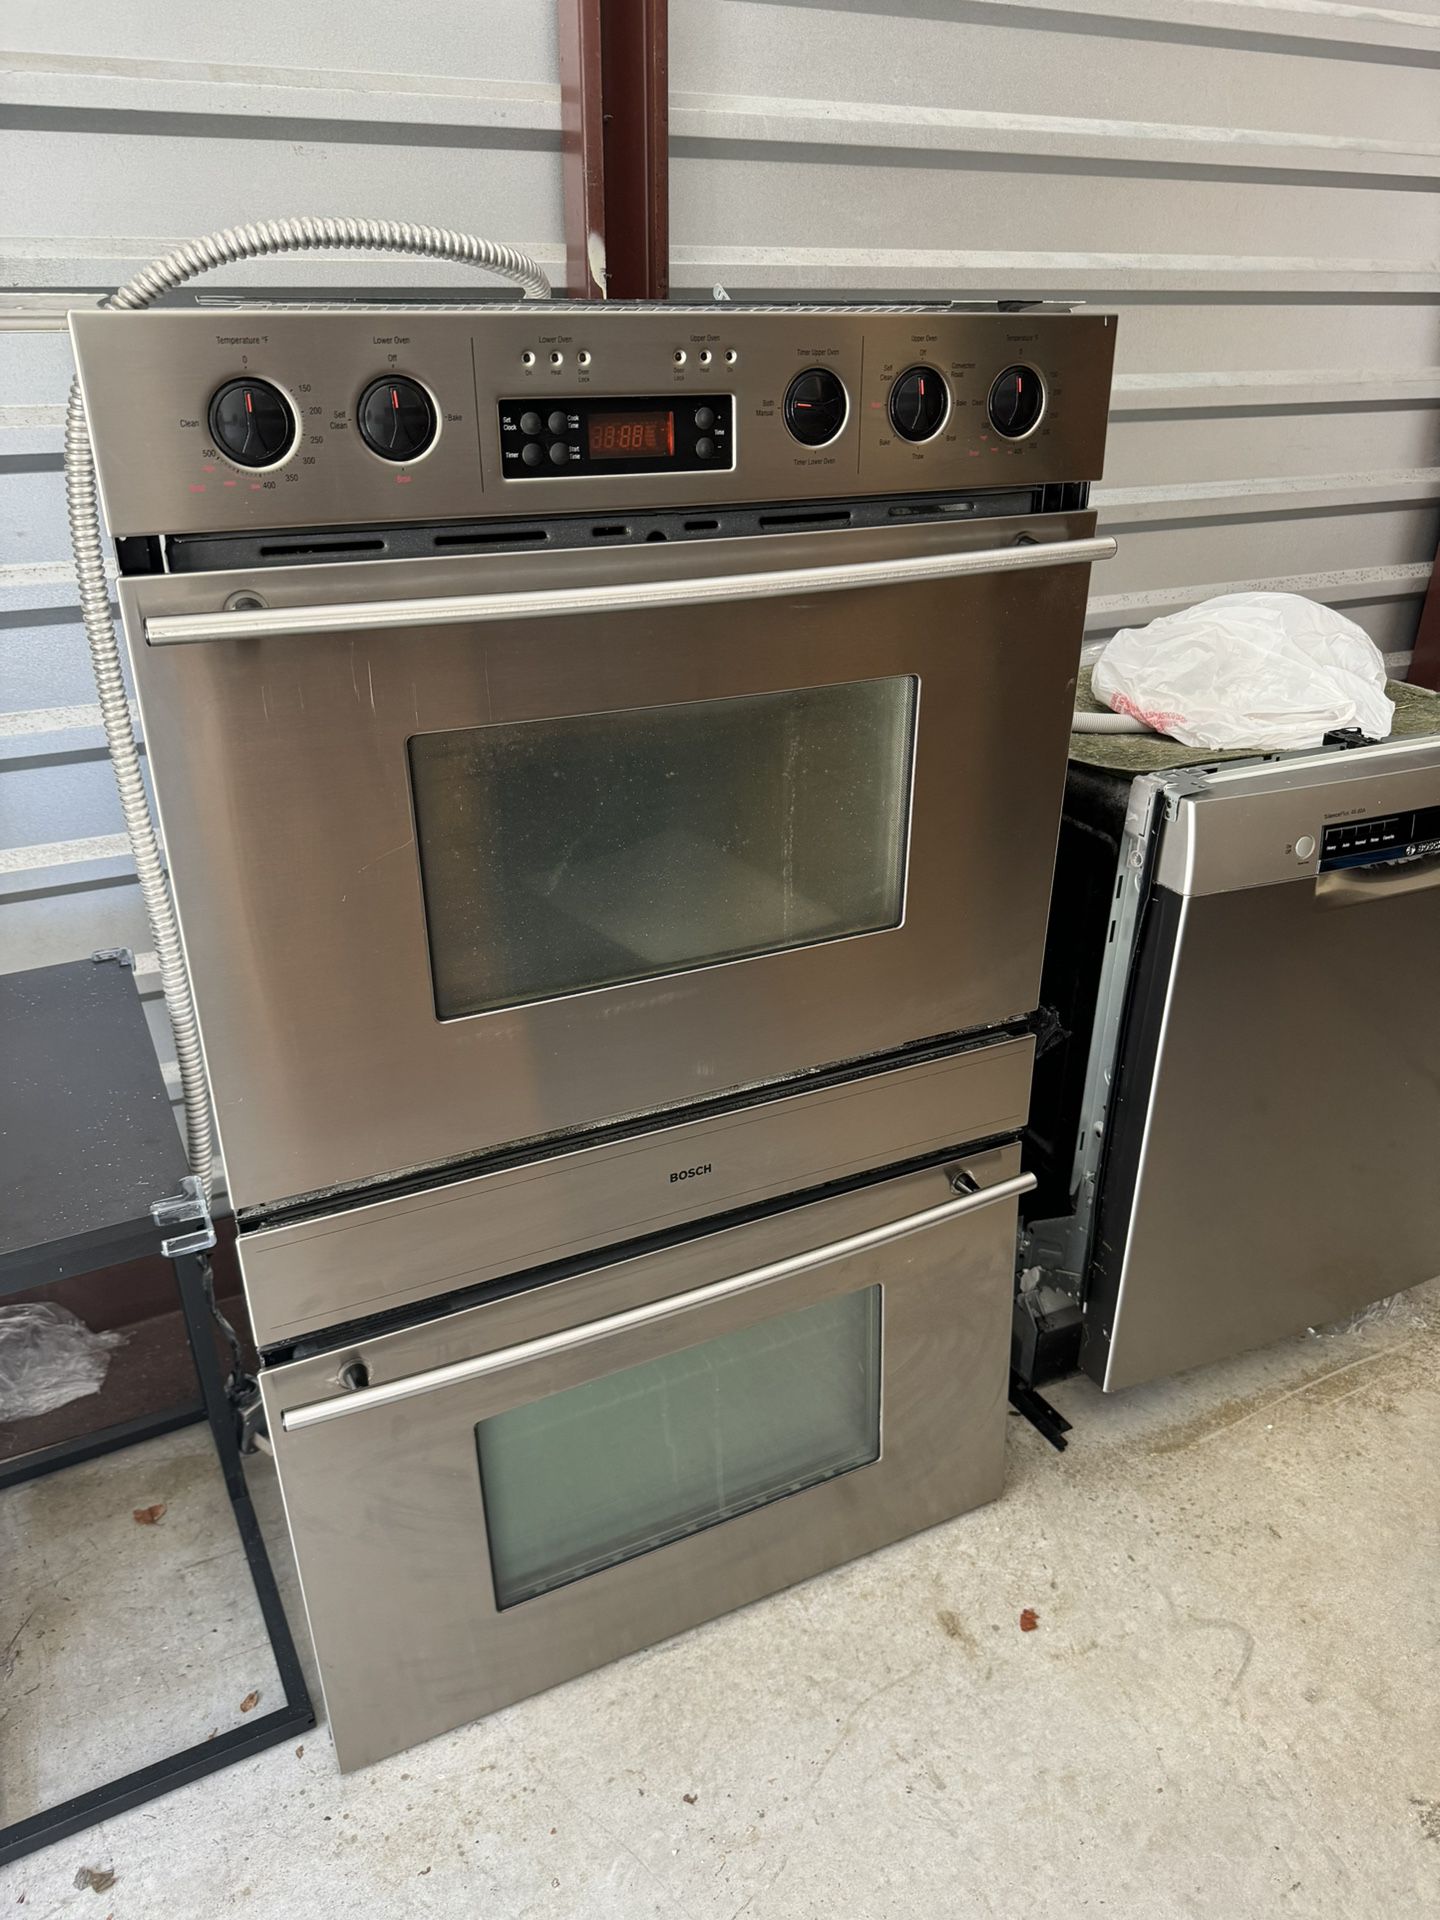 Bosch Double Wall oven Stainless Steel 30"  HBL455AUC  - Originally Over $7500.    Asking $375